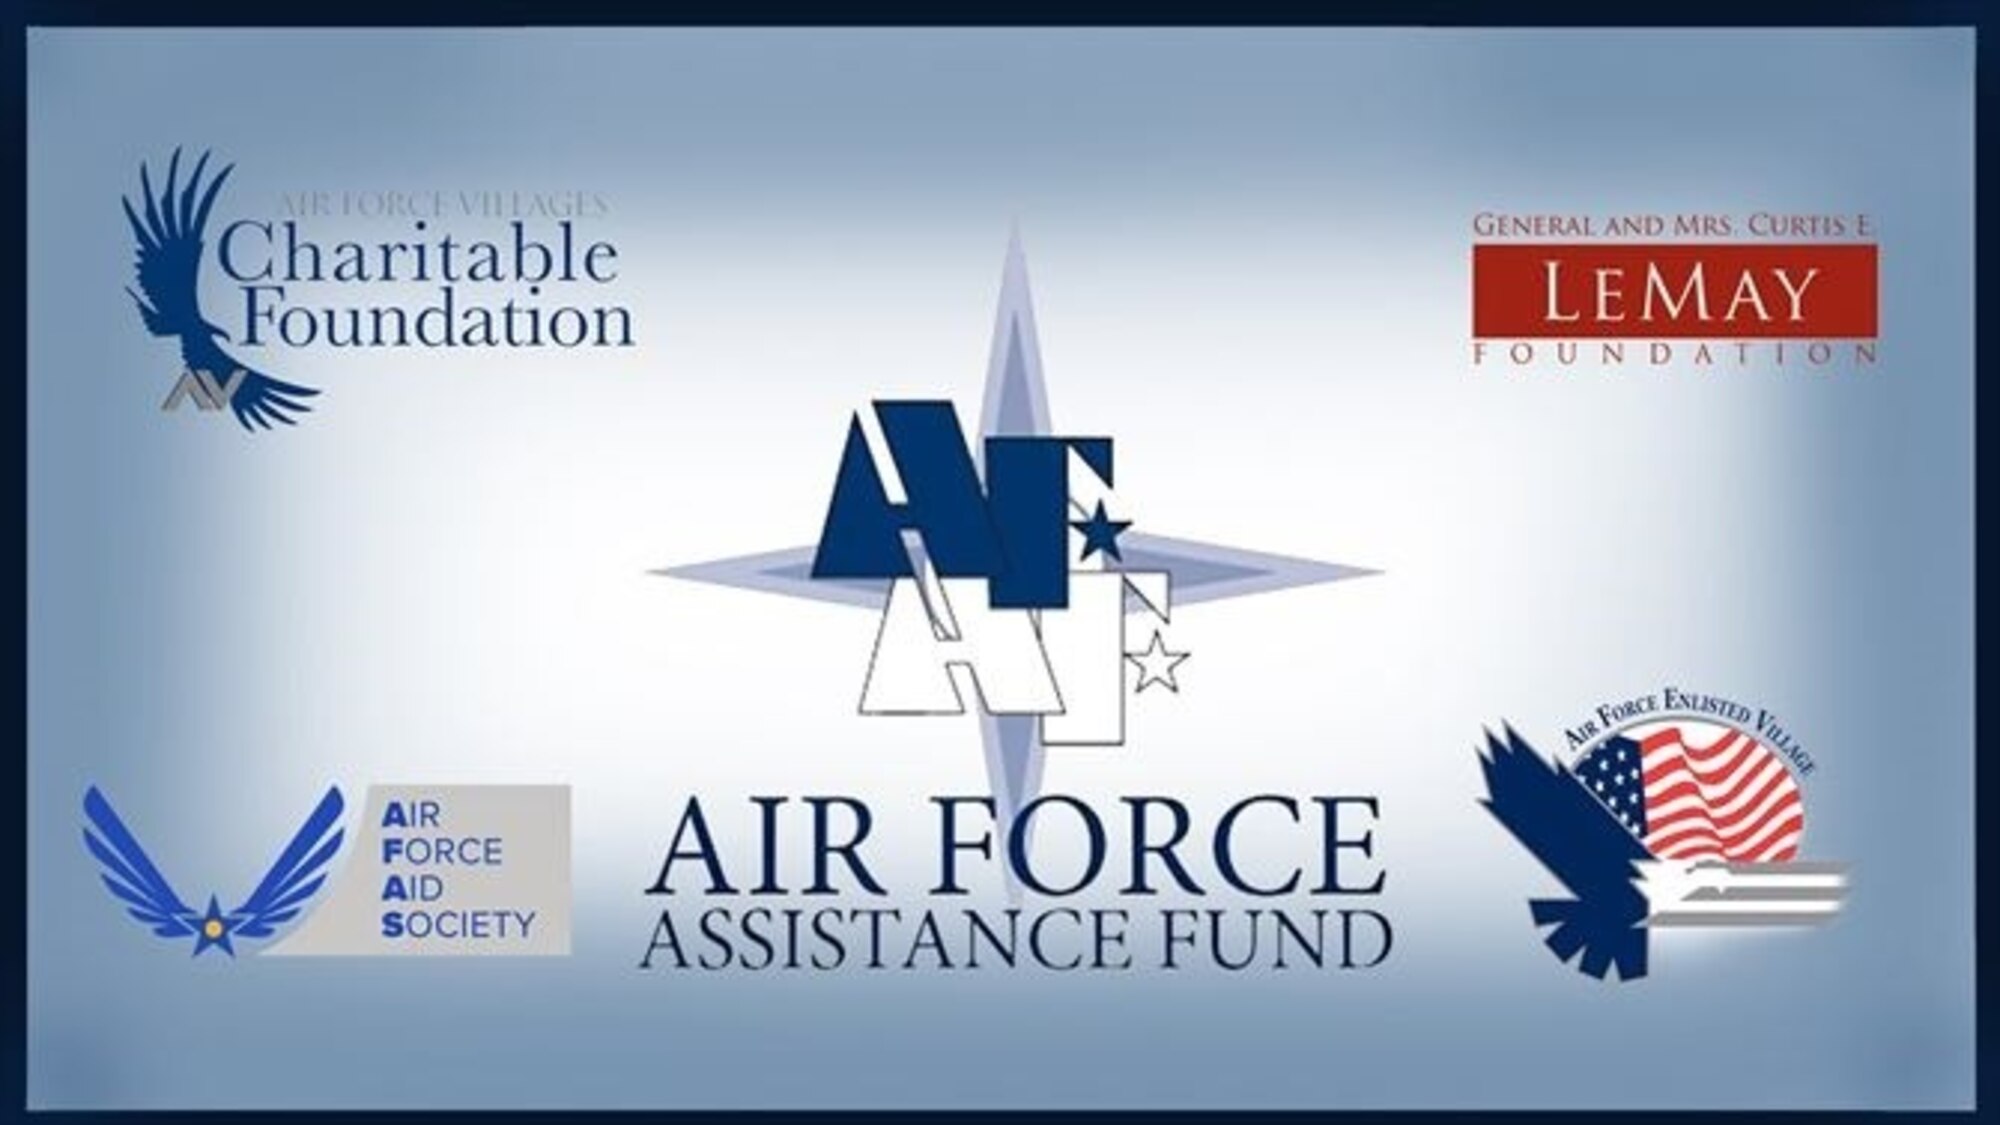 The AF Assistance Fund Campaign began a few weeks ago, and since then, our Air Force Charities have responded to the effects this virus is having on our Air Force family in an all-out attempt to support their fellow Airmen and their families in any way possible.